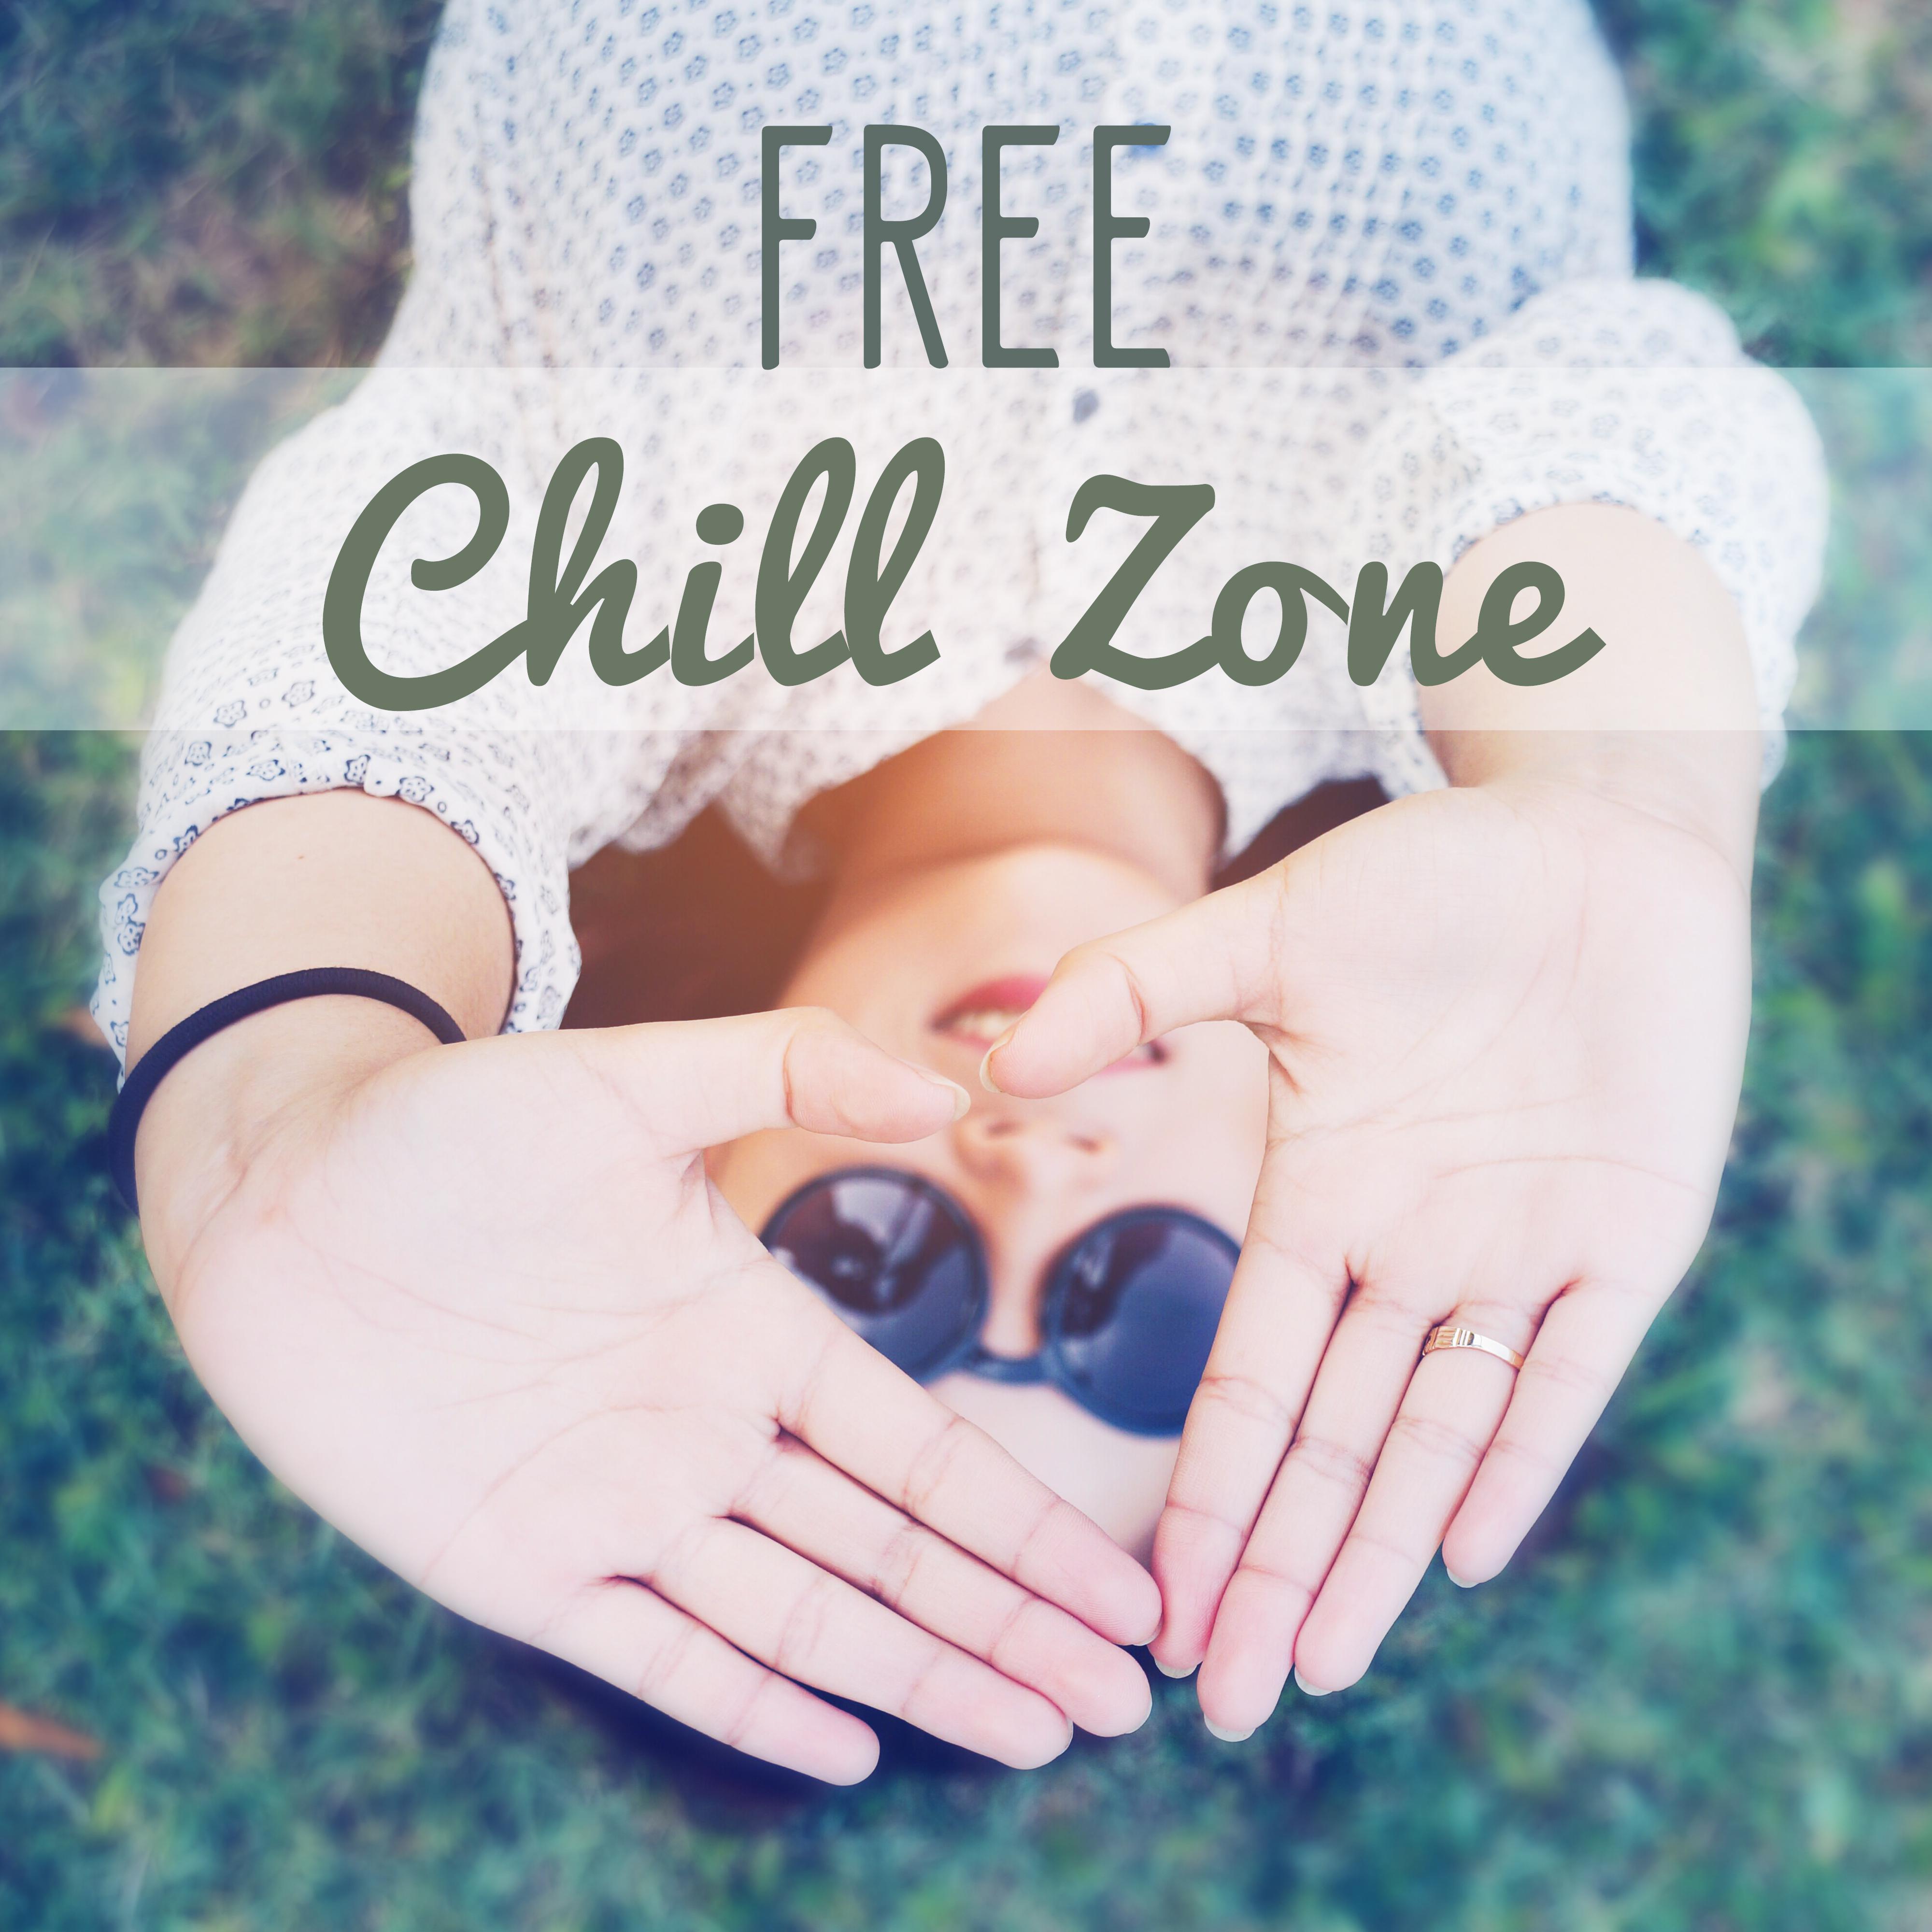 Free Chill Zone - Deep Summer, Cafe Background Music, Chillout on the Beach, Chilled Holidays, Chill Out Music